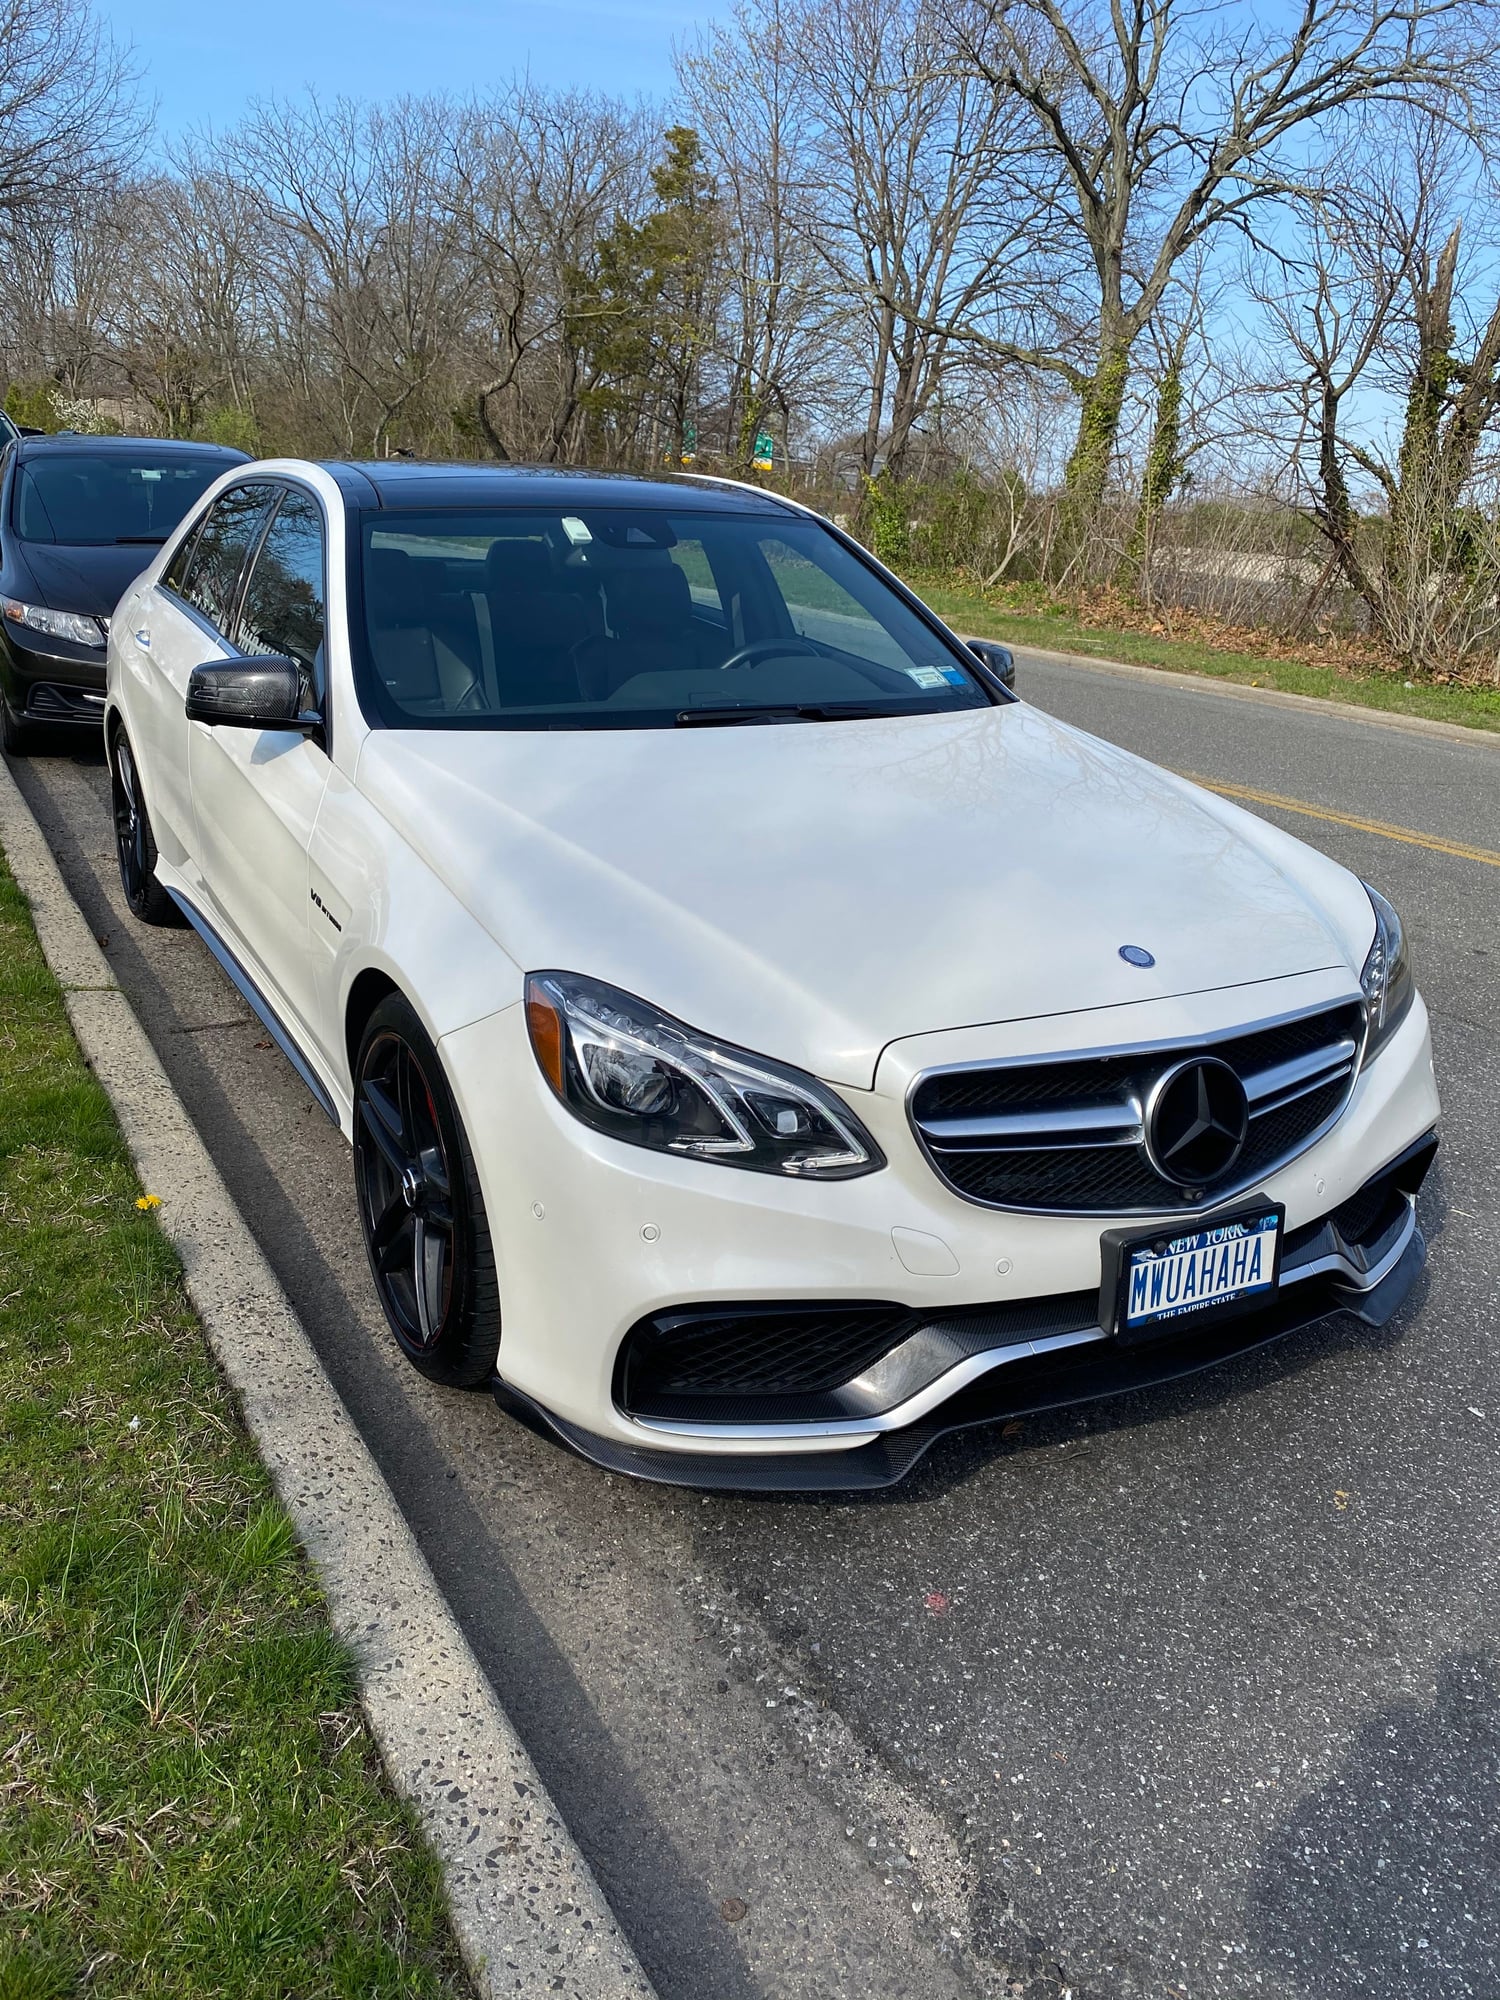 2014 Mercedes-Benz E63 AMG S - 2014 E63s Diamond White w/factory CF package. Dealer maintained and daily driven - Used - VIN WDDHF7GB2EA997897 - 58,000 Miles - 8 cyl - AWD - Automatic - Sedan - White - Babylon, NY 11702, United States